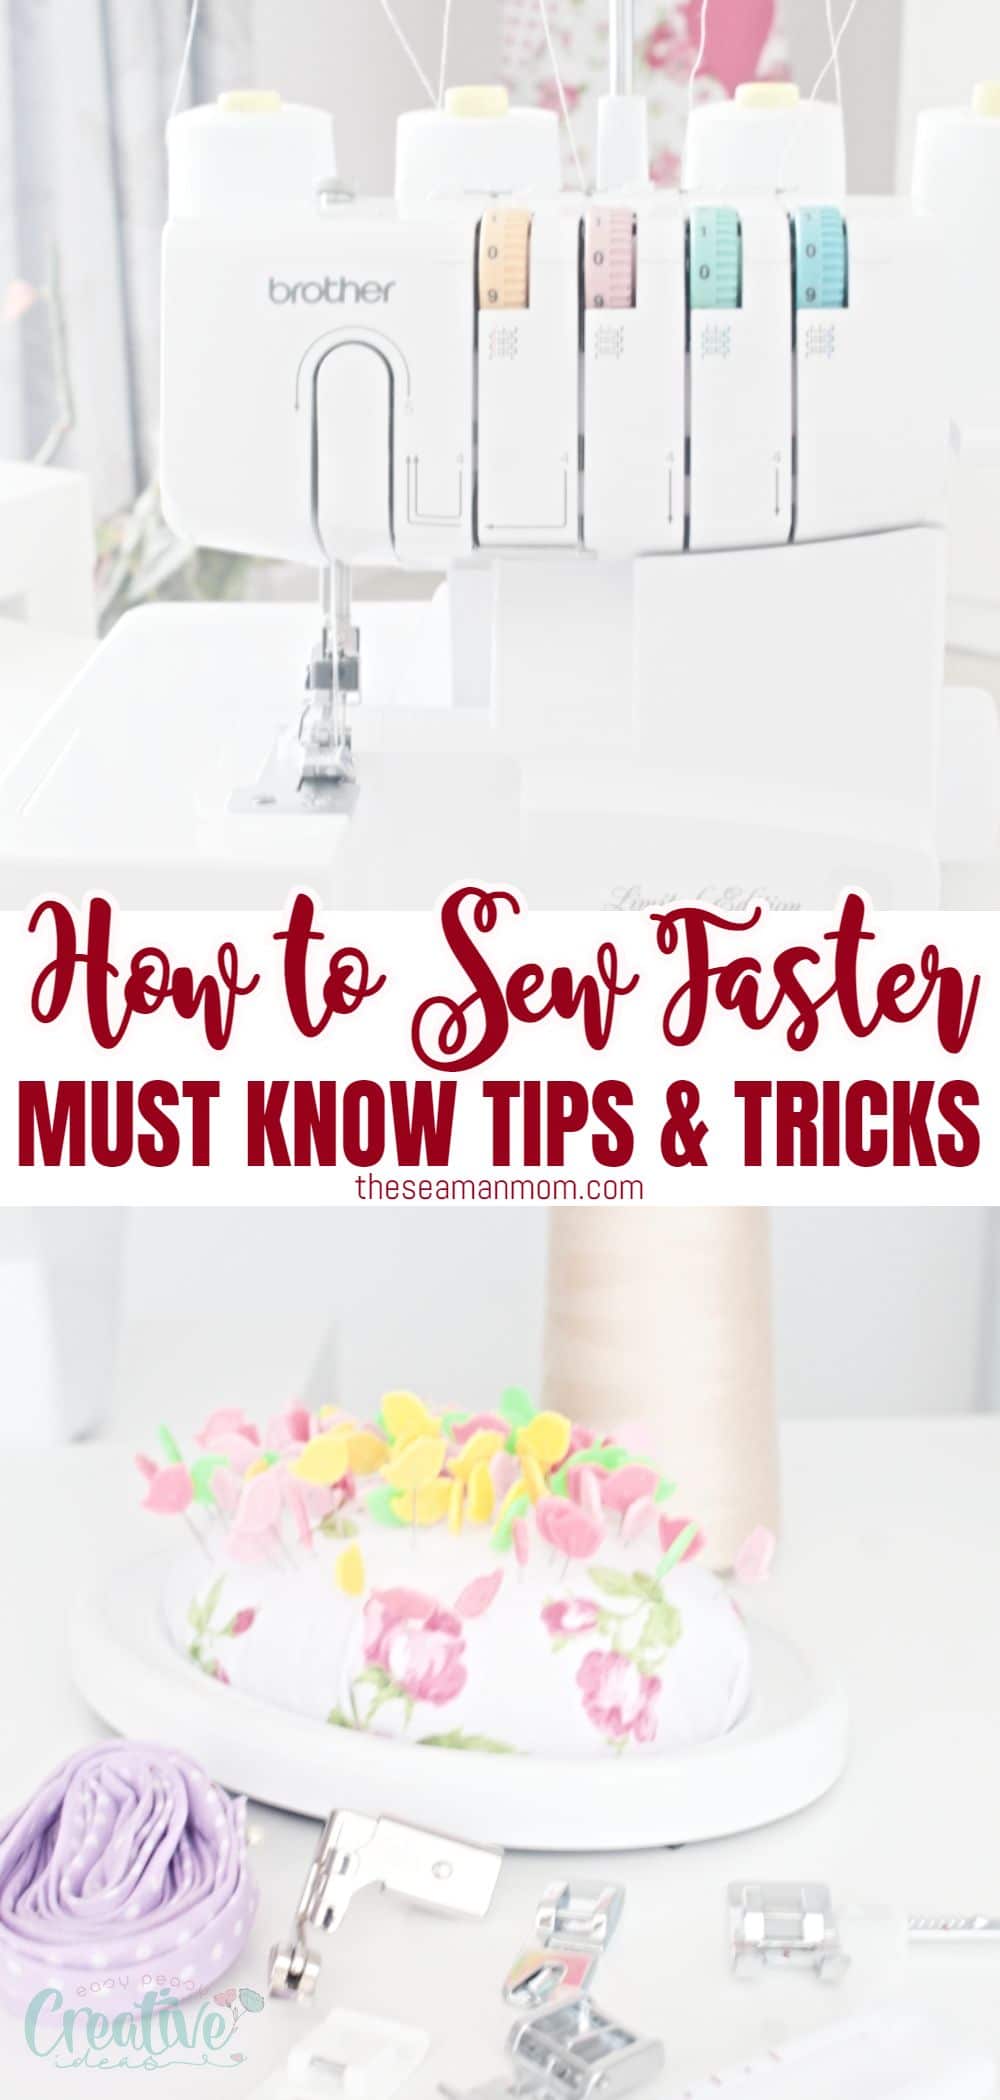 Looking for ideas to sew faster but still get professional results? Check out this great list of tips and tricks for fast sew that you need to have in your arsenal, whether you're an experienced seamstress or a beginner just starting out! via @petroneagu